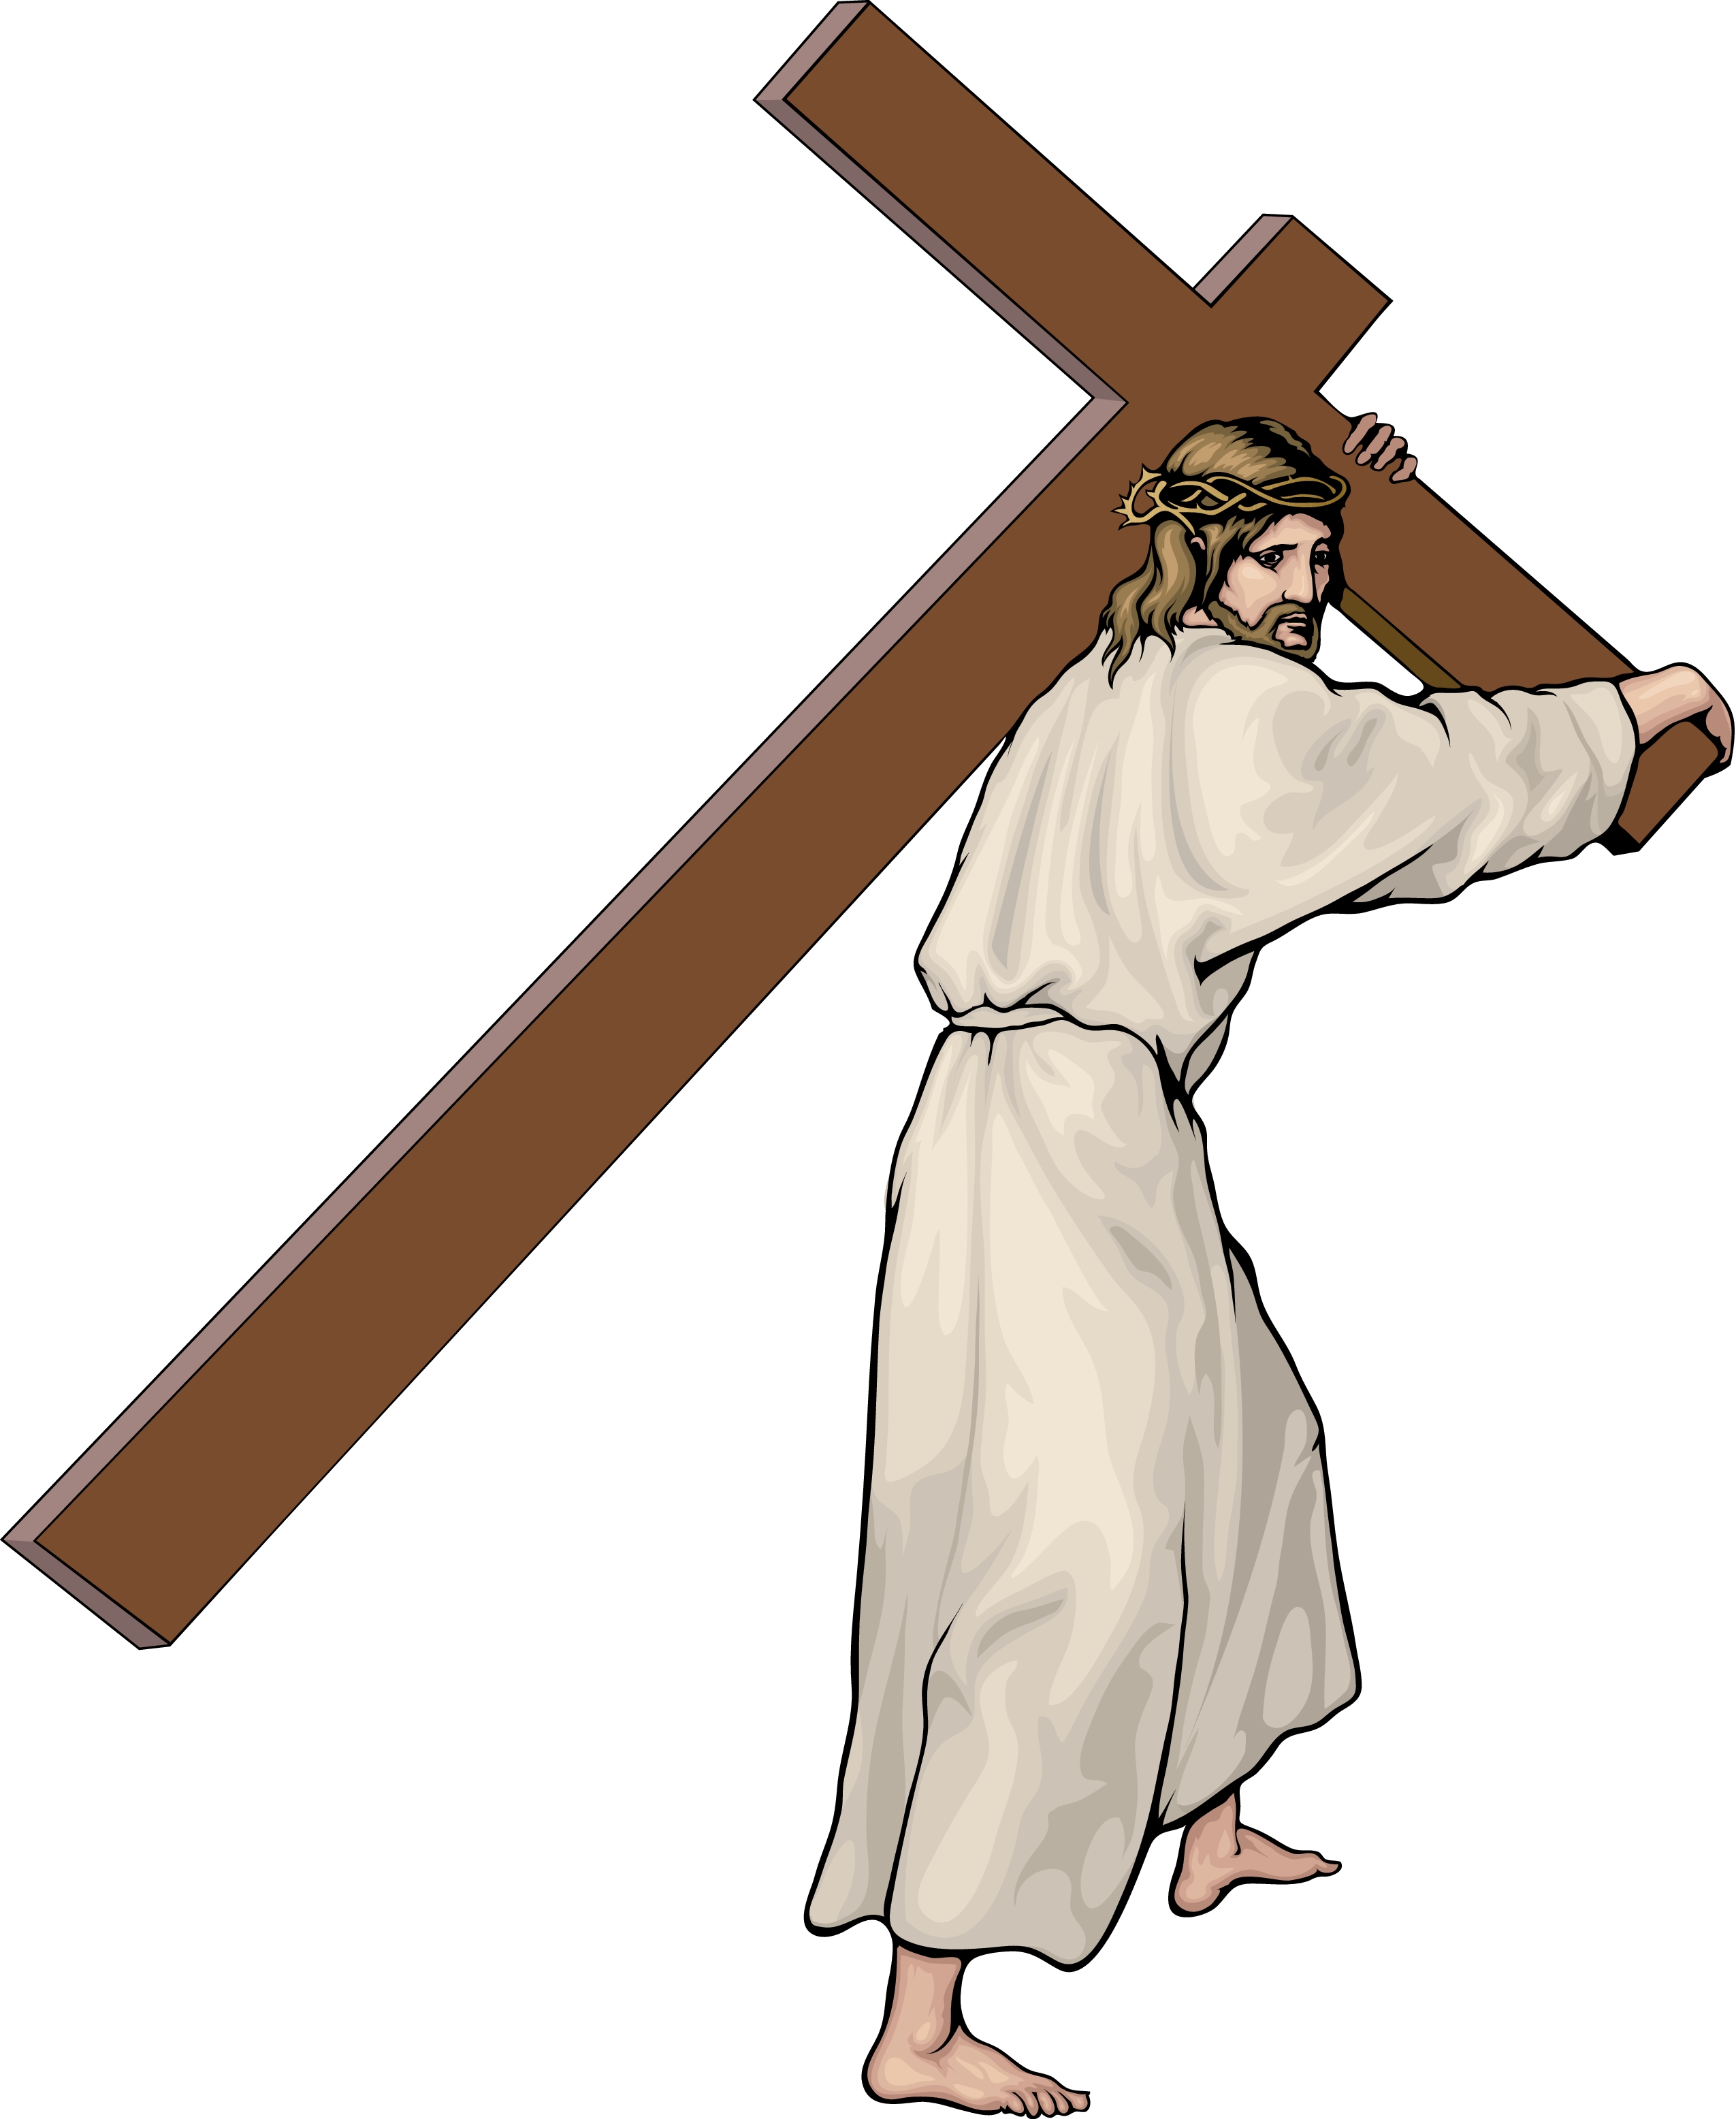 clipart images of jesus on the cross - photo #37